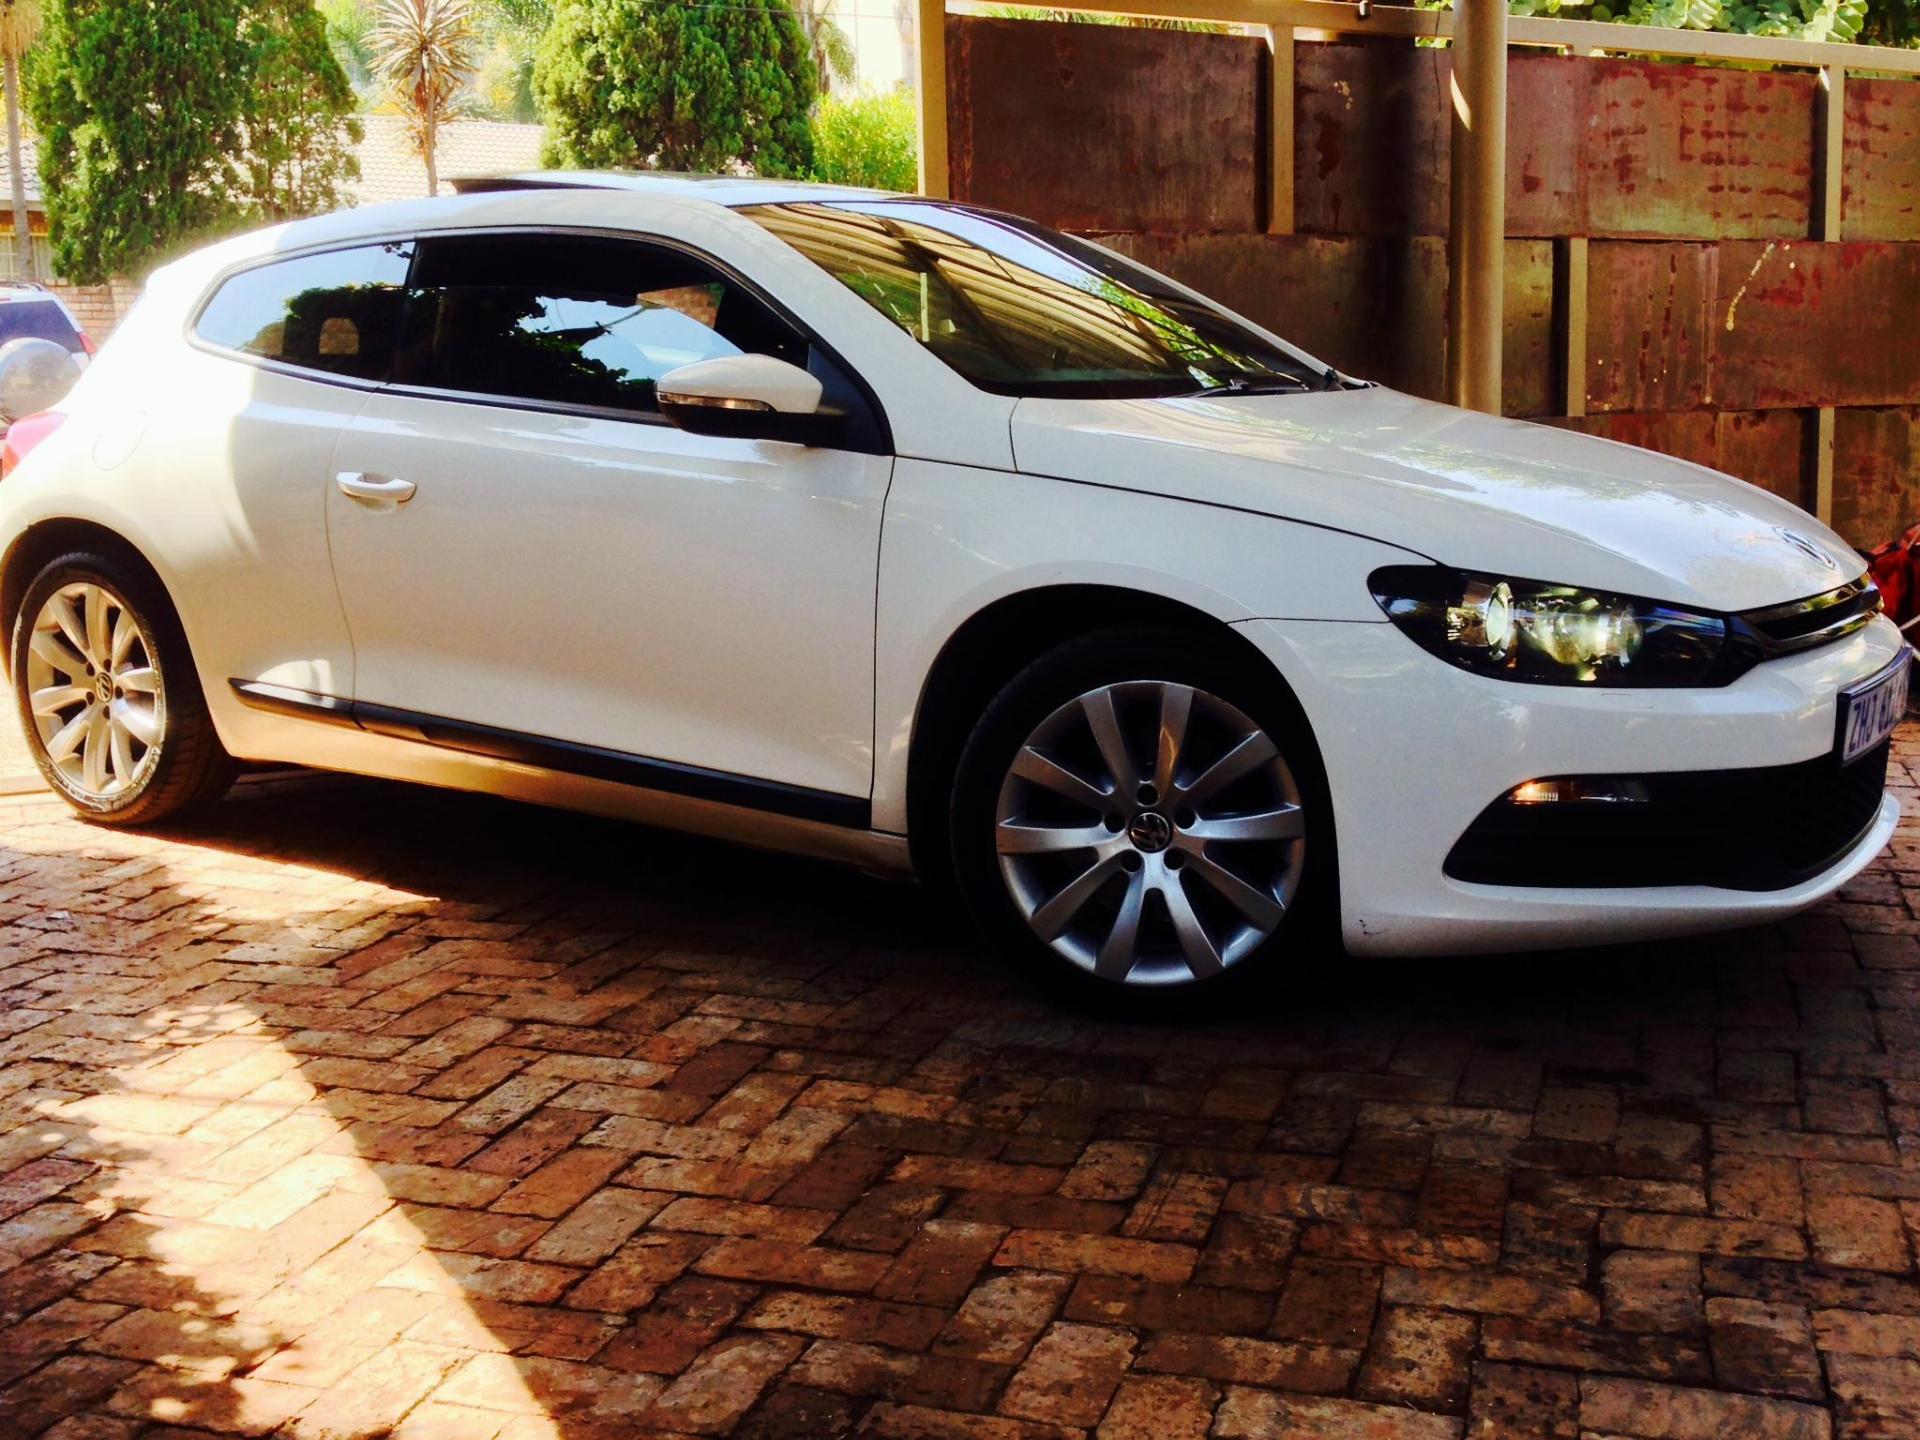 Used VW Scirocco 1.4 Tsi 2010 on auction PV1009735